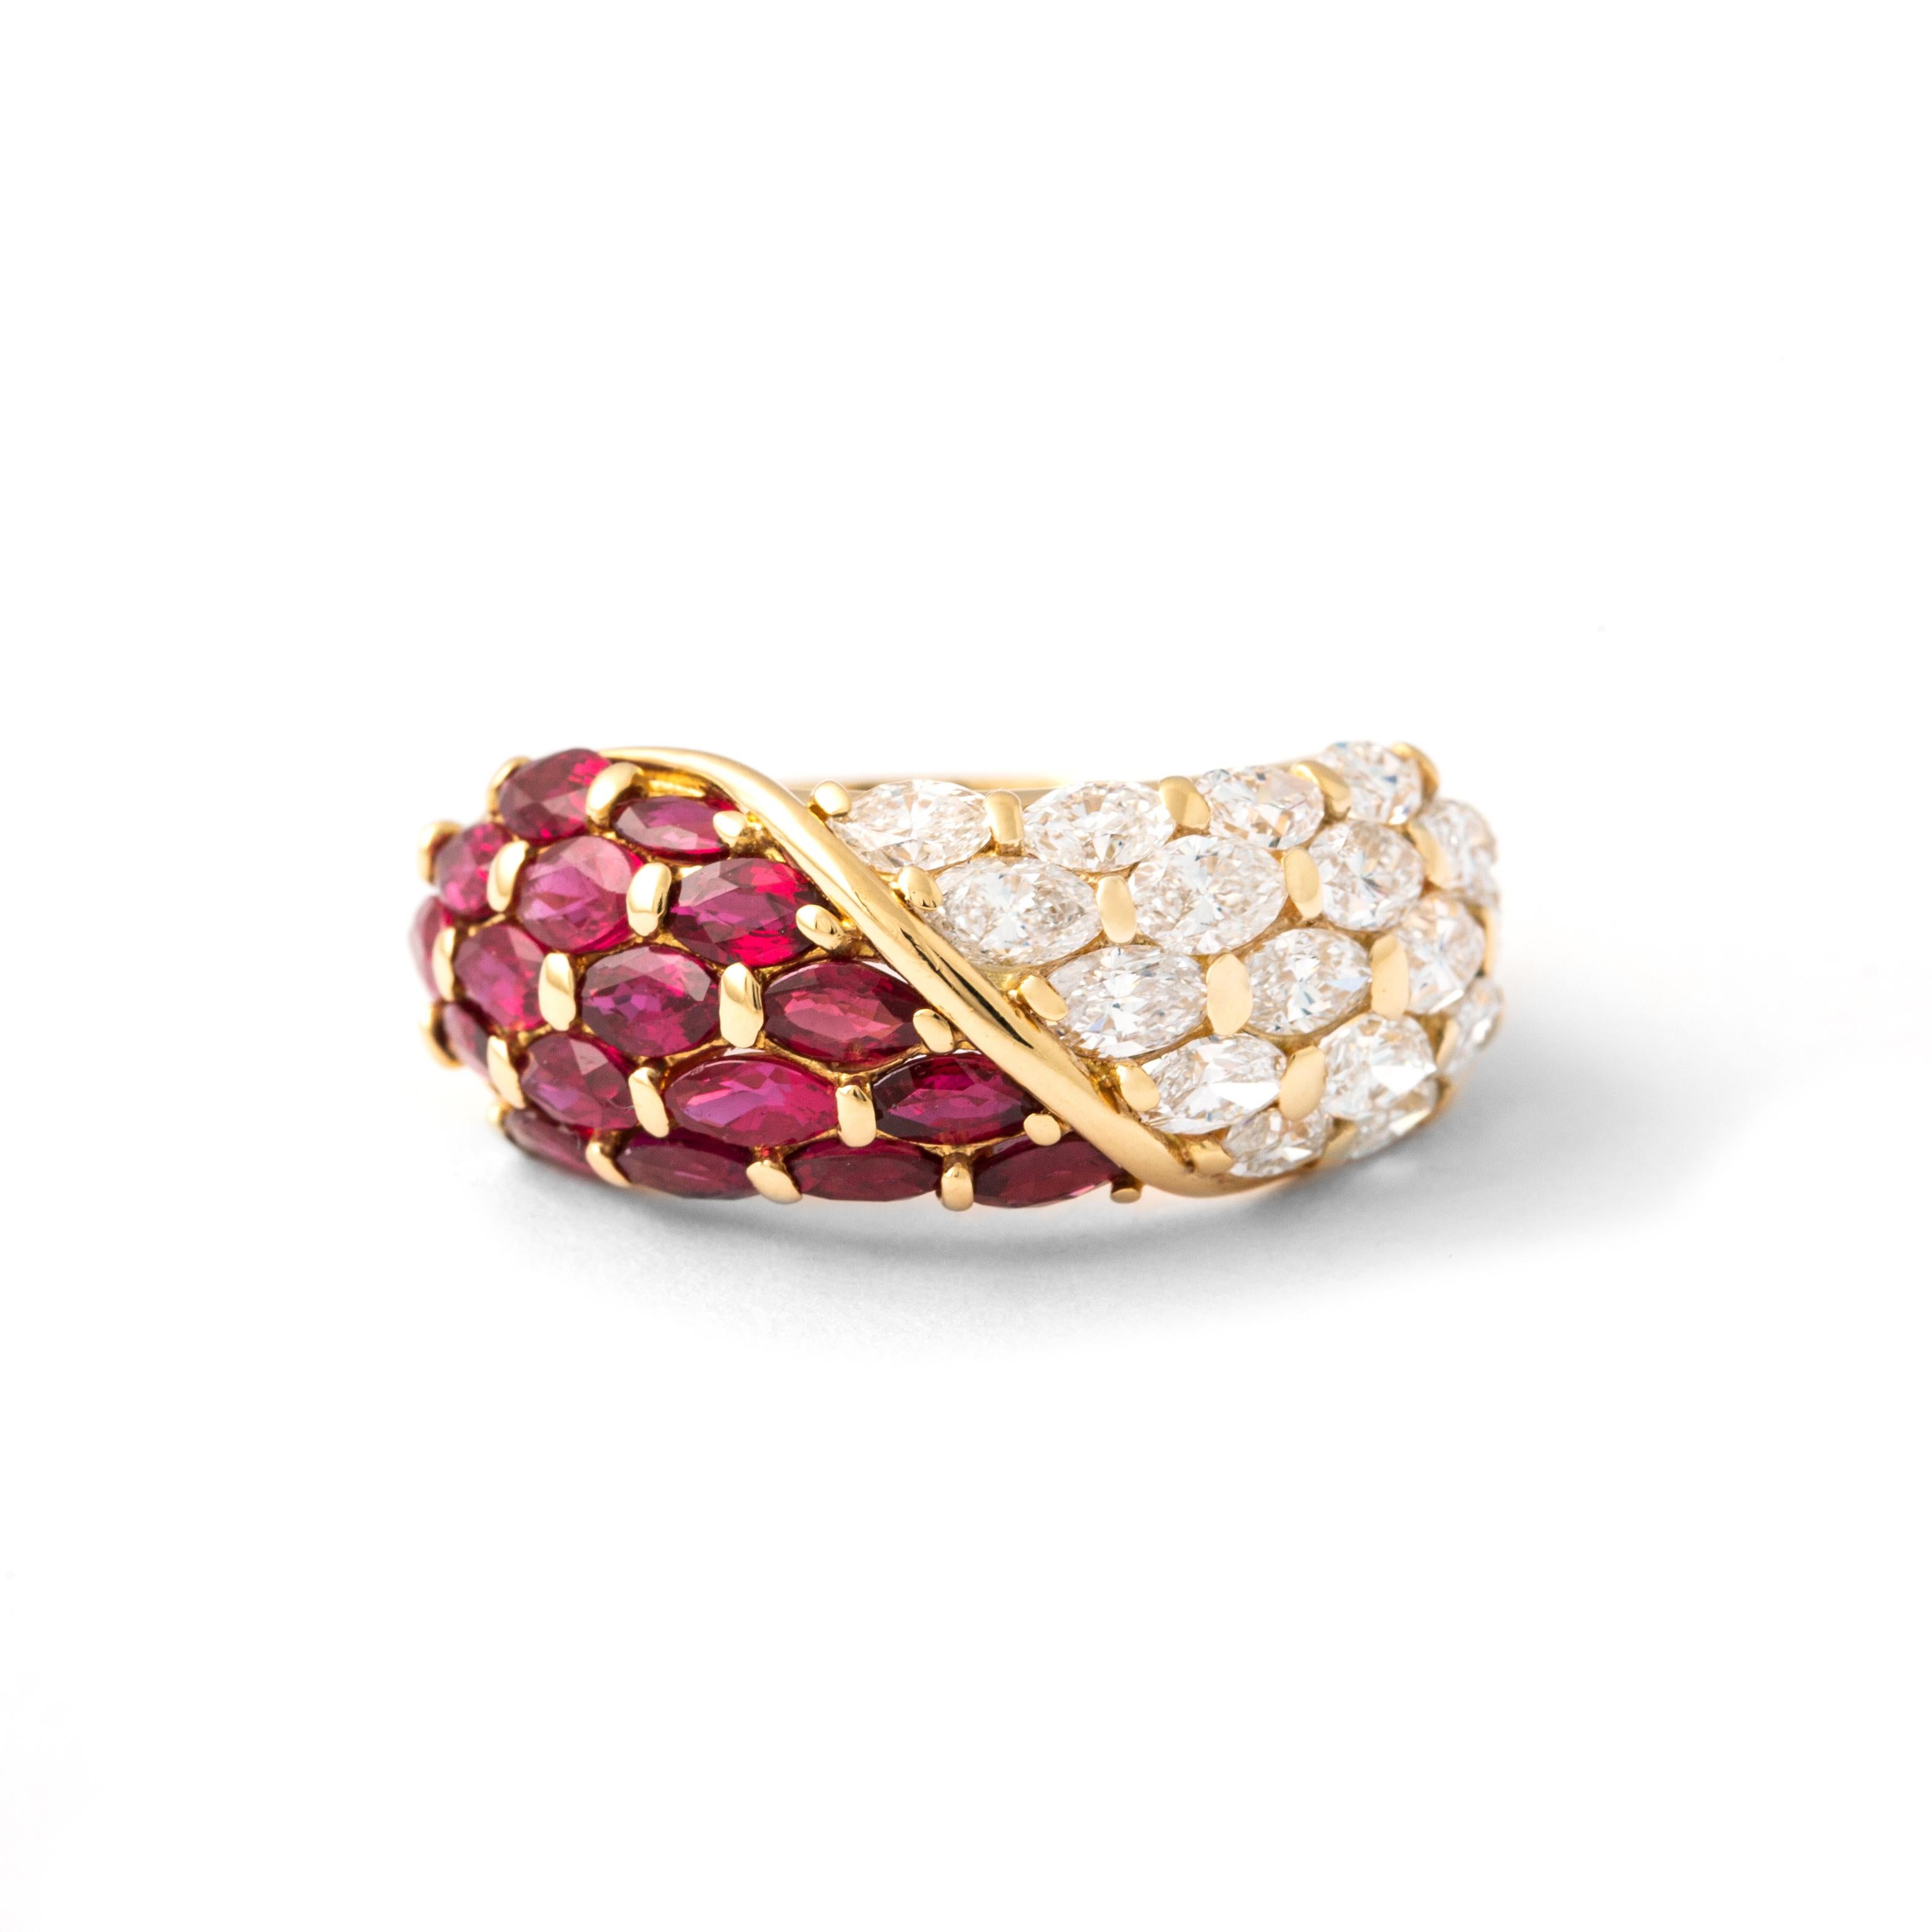 Ring in 18kt yellow gold set with 17 diamonds 2.01 cts and 17 17 rubies 2.56 cts Size 54

Total weight: 8.83 grams.